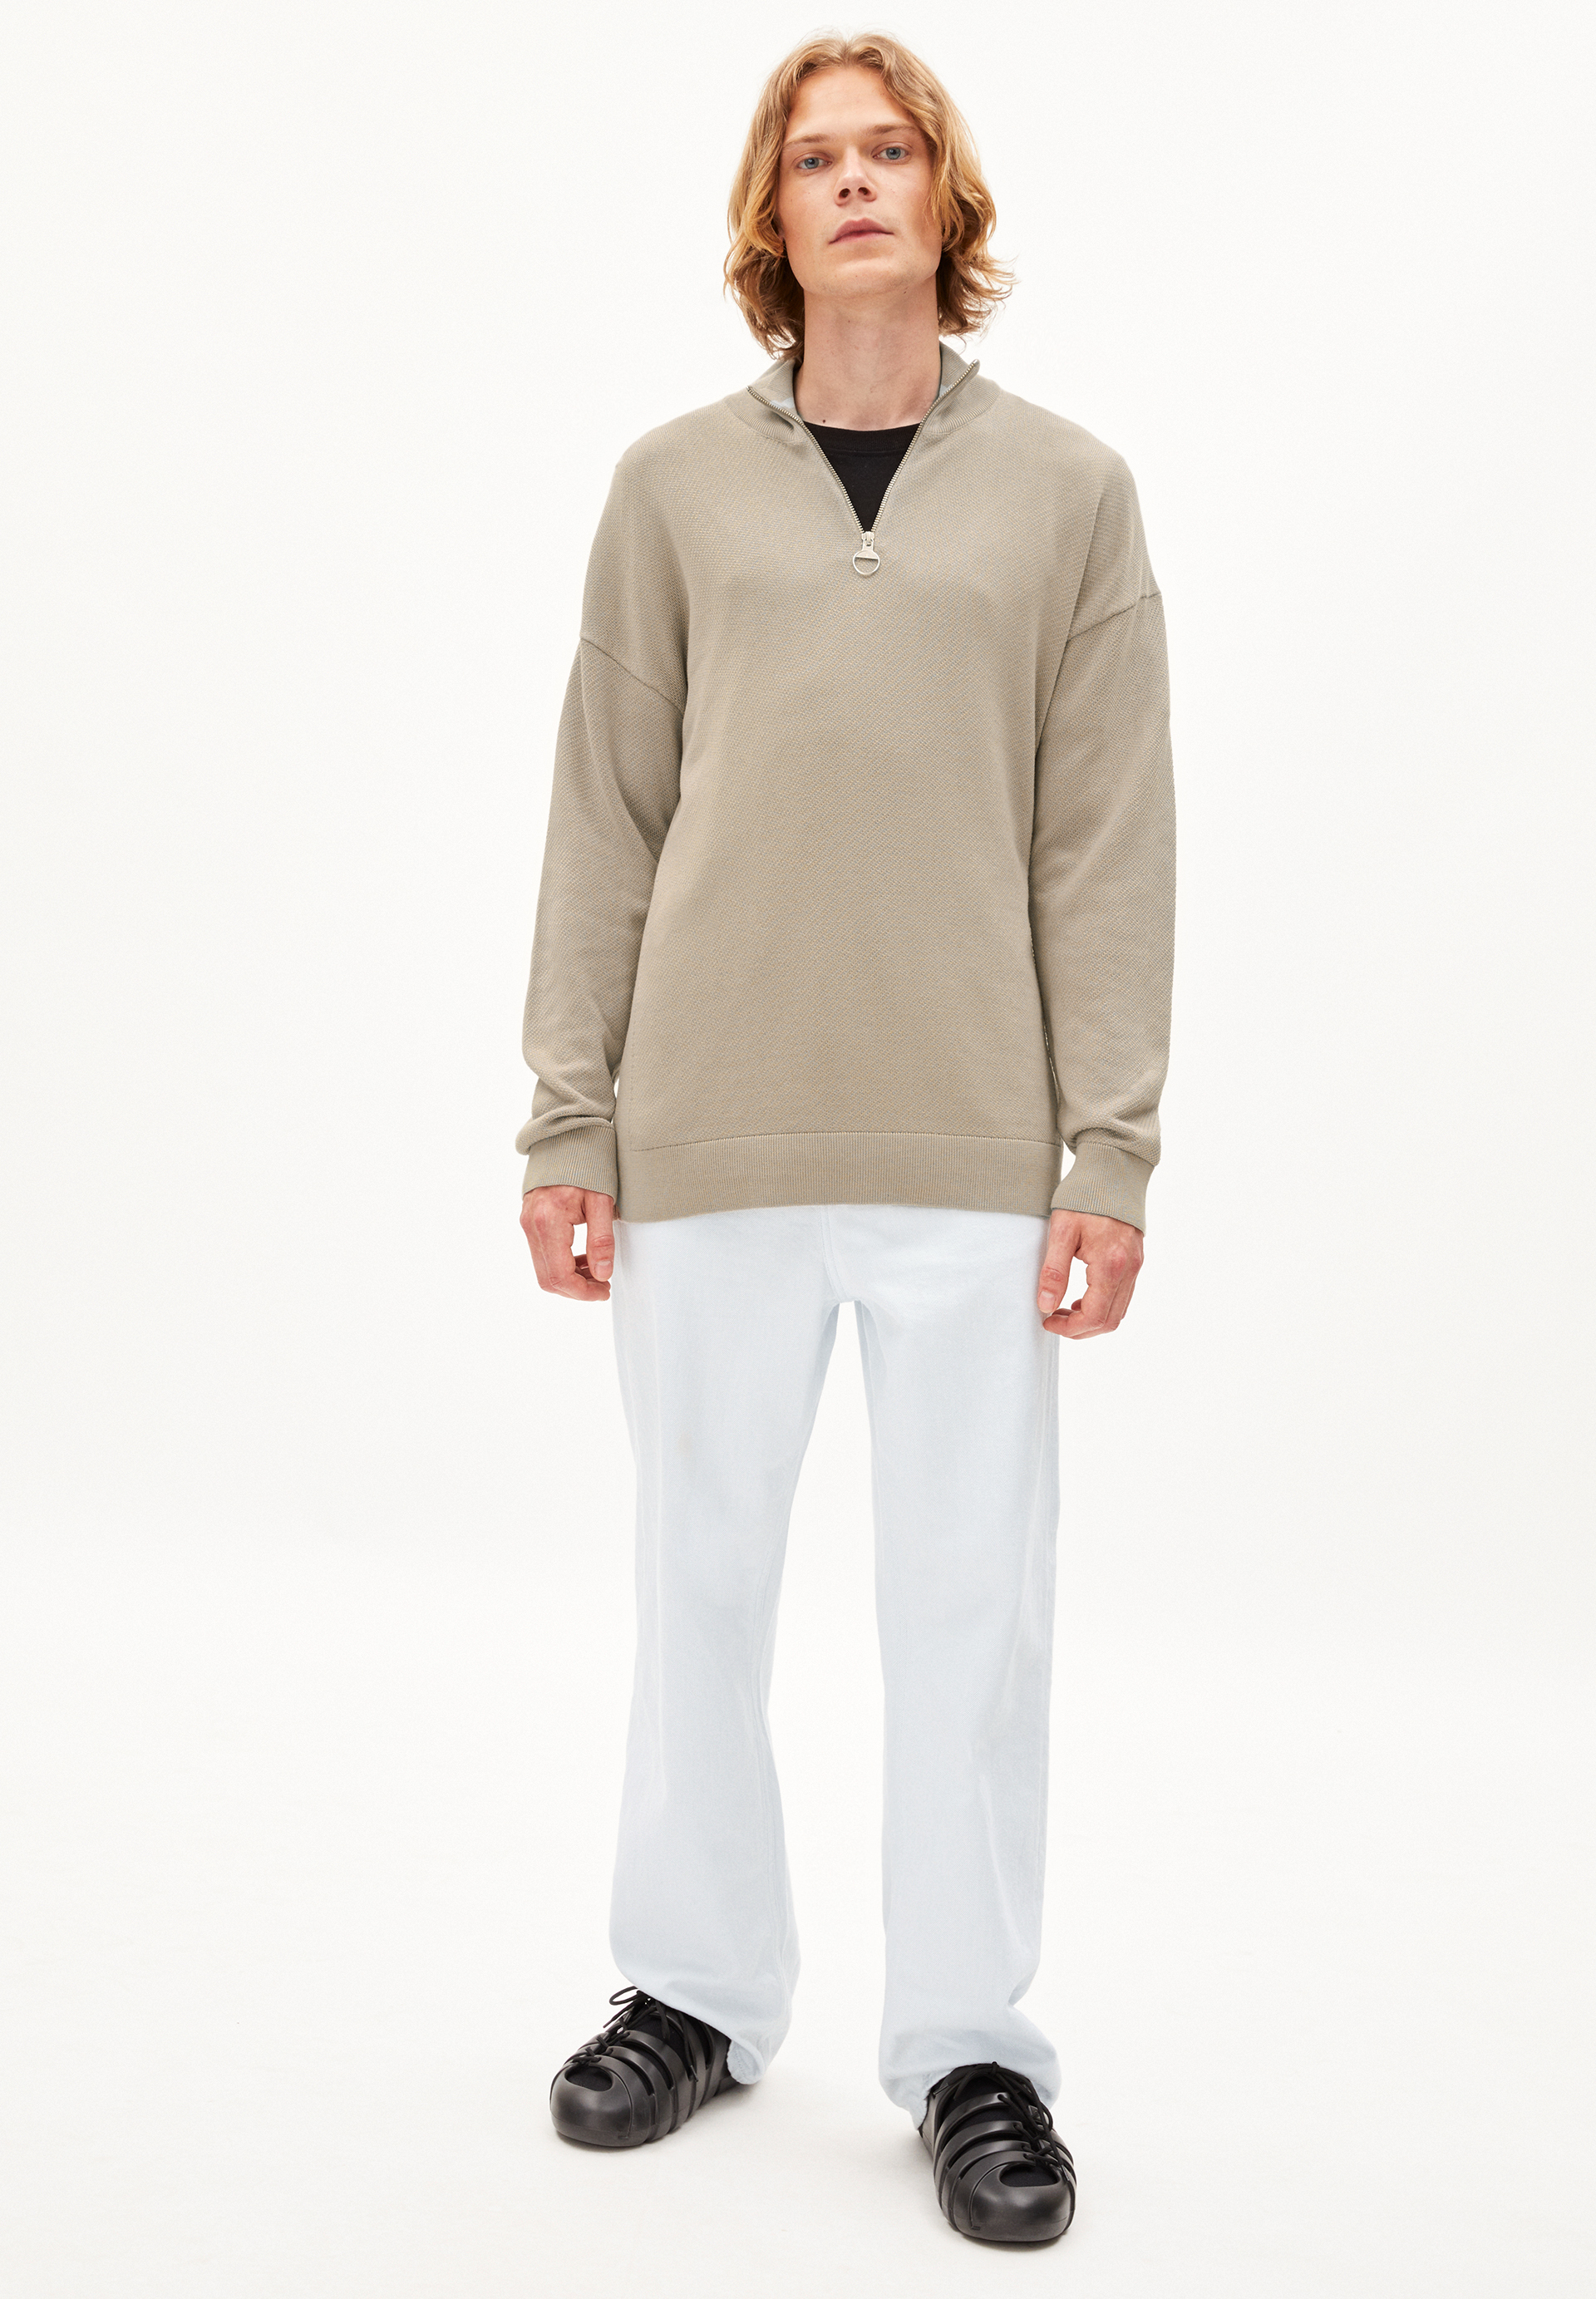 LEDAAN Pullover Relaxed Fit aus TENCEL™ Lyocell Mix